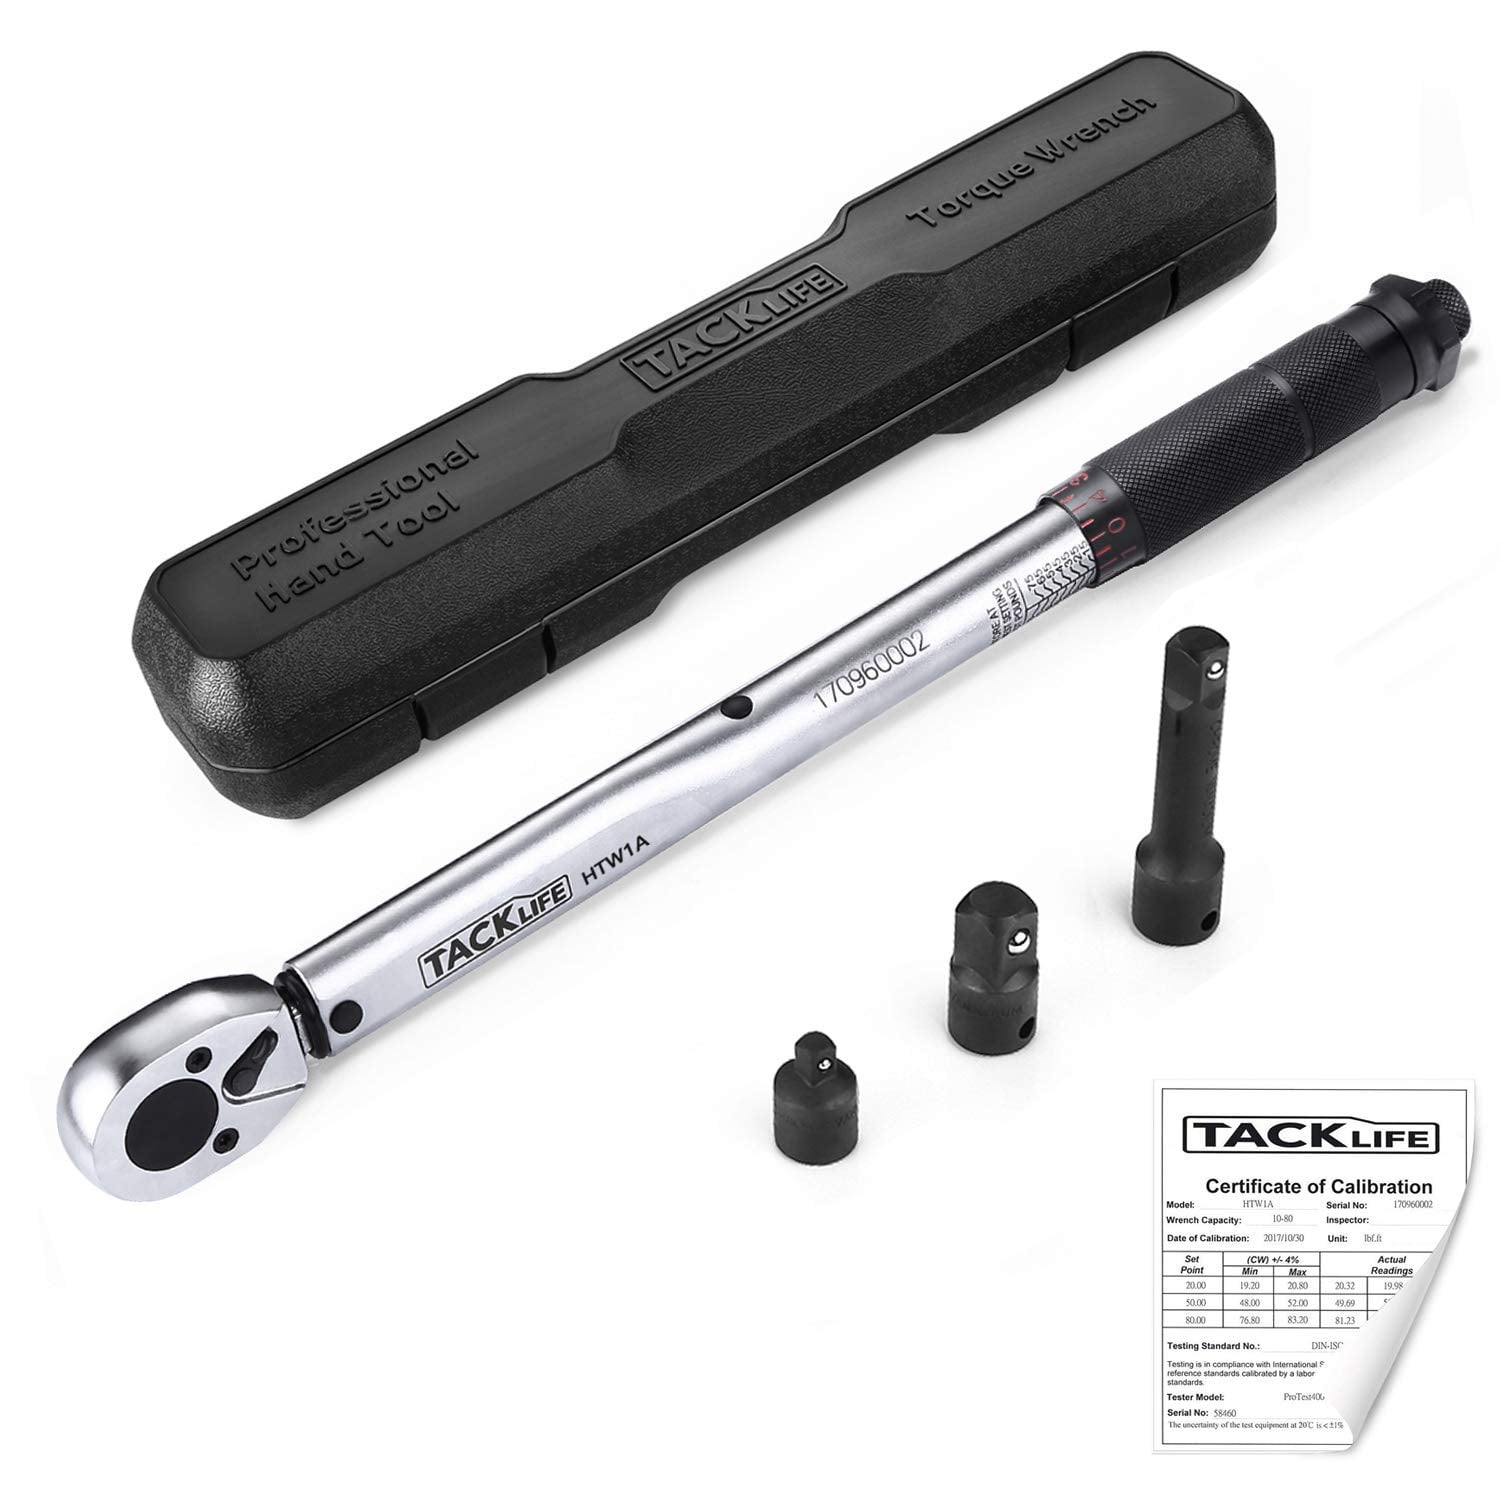 WORKPRO 1/2" 3/8" Drive Click Torque Wrench Reversible Stainless Steel Ratchet 